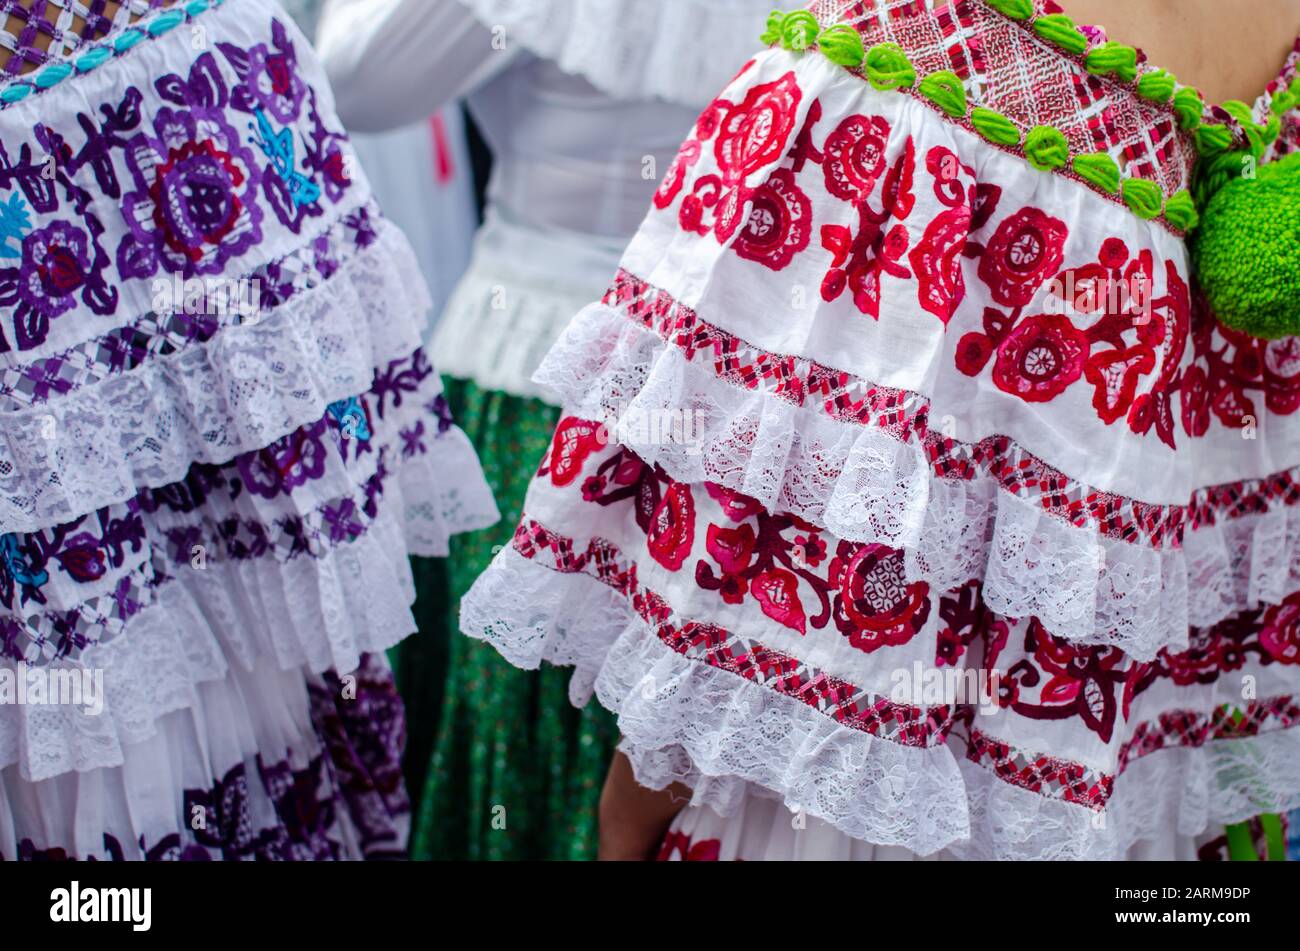 Details of the typical Panamanian dress known as pollera. The pattern is all handmade using different embroidery techniques Stock Photo